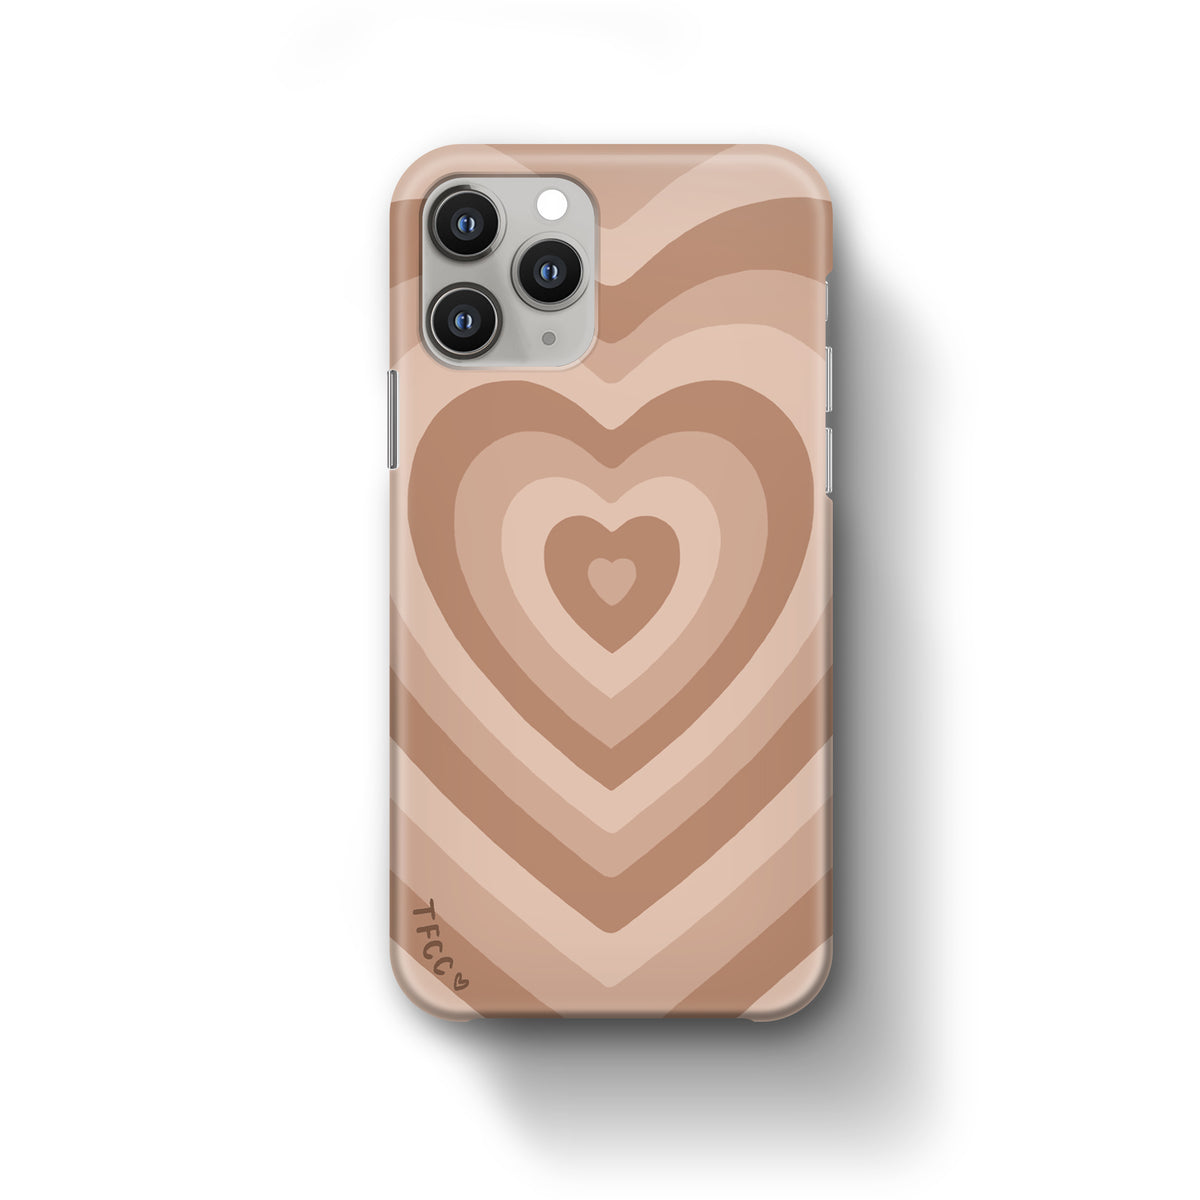 Checked Heart Phone Case available in iPhone and Android 